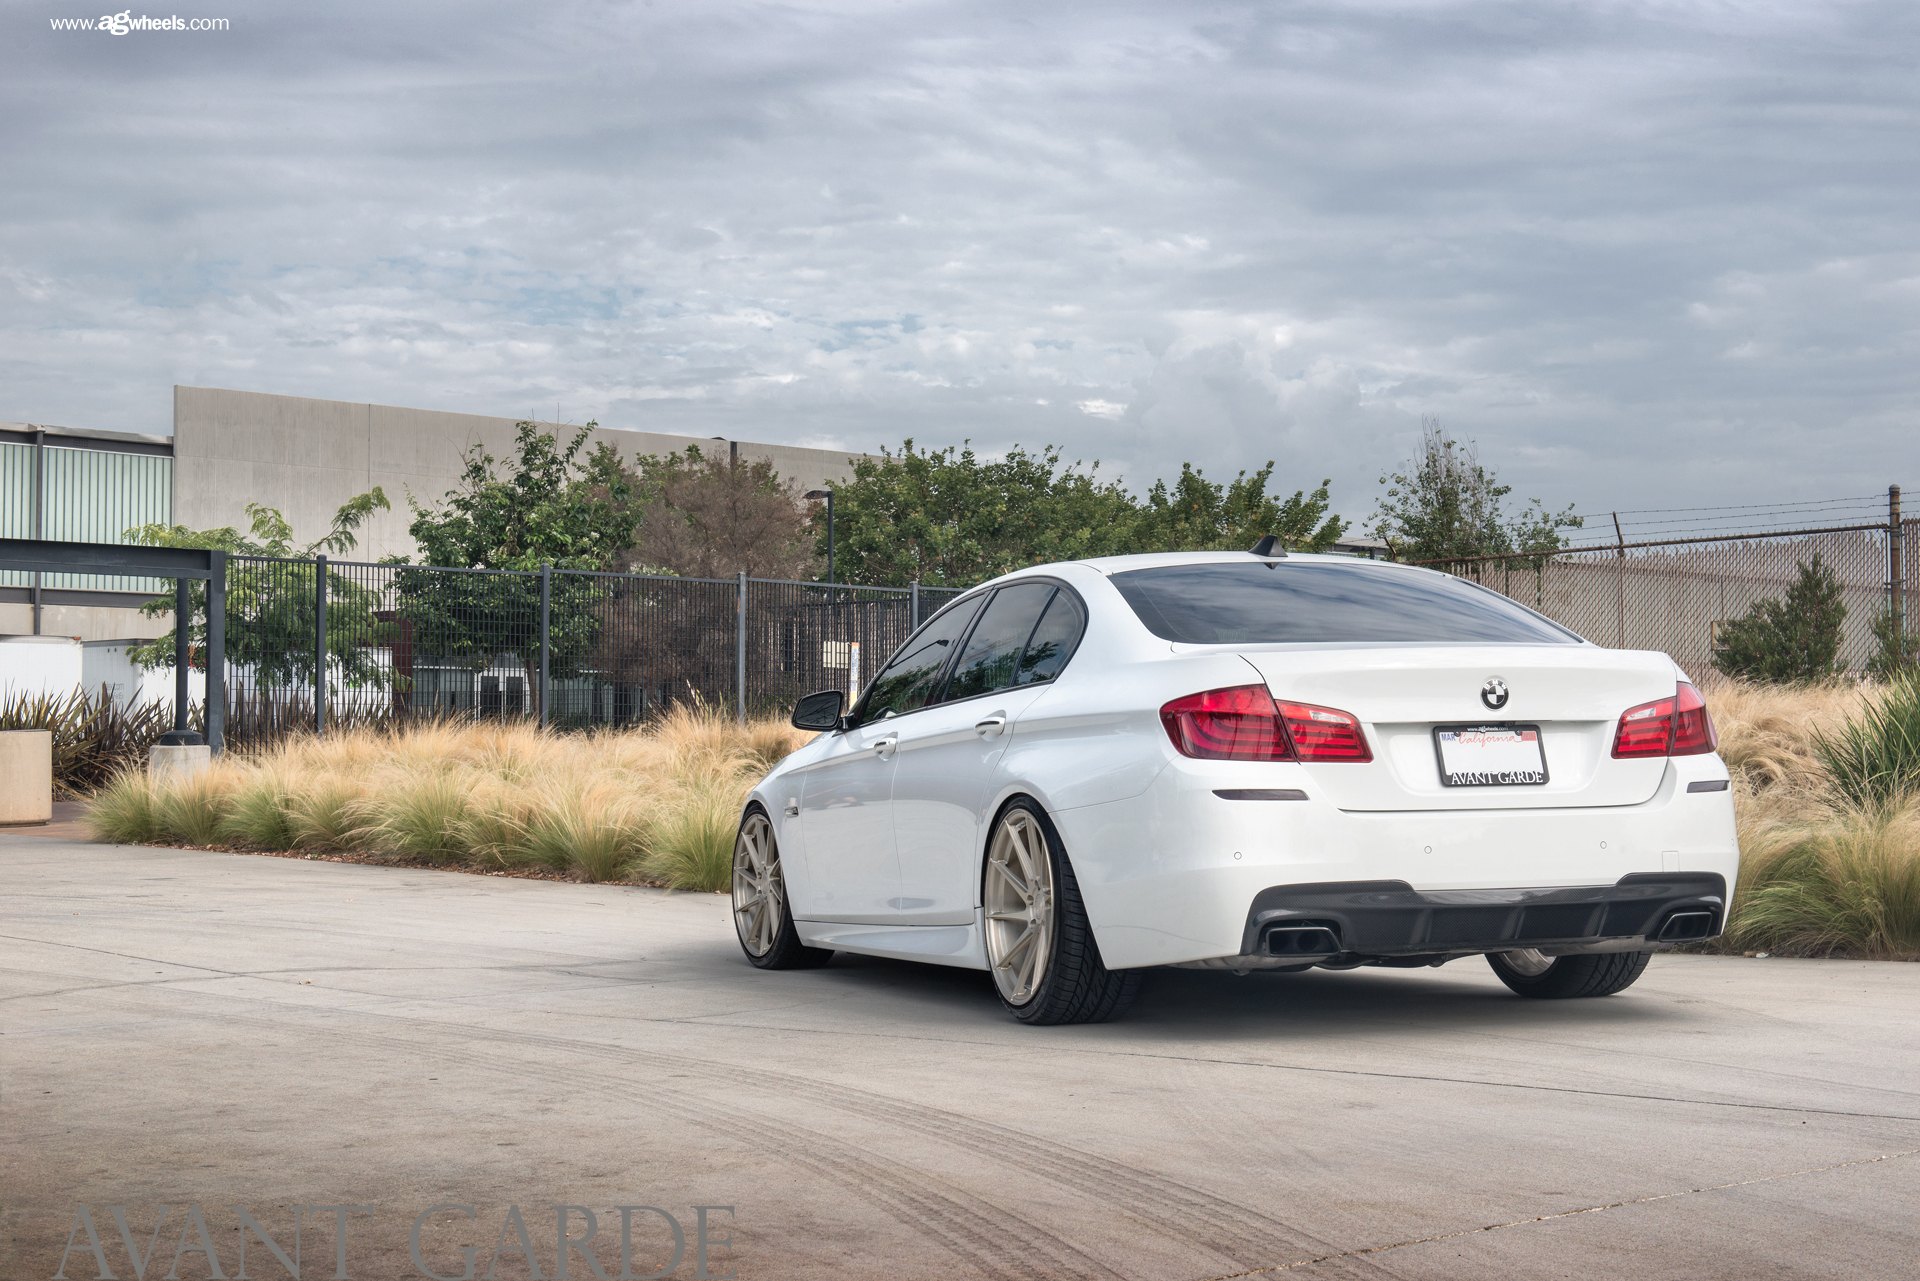 White BMW 5-Series with Custom Red Taillights - Photo by Avant Garde Wheels